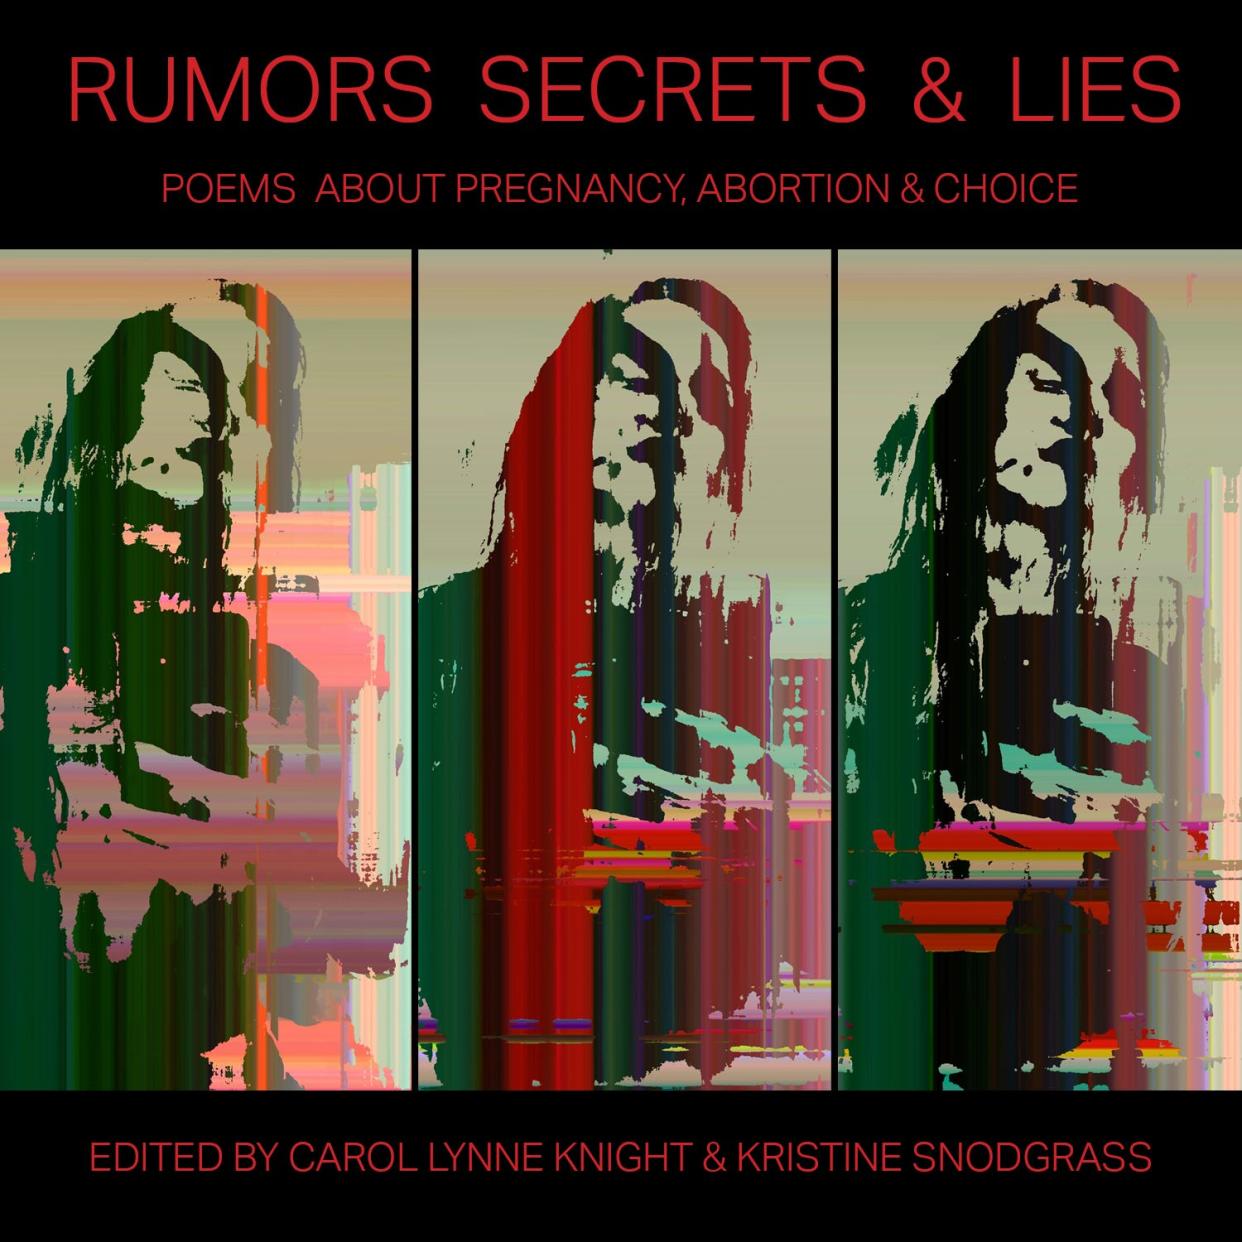 "Rumors, Secrets & Lies: Poems about Pregnancy, Abortion & Choice," edited by Carol Lynne Knight and Kristine Snodgrass, published by Tallahassee's Anhinga Press, Oct. 26, 2022, paperback, $30.